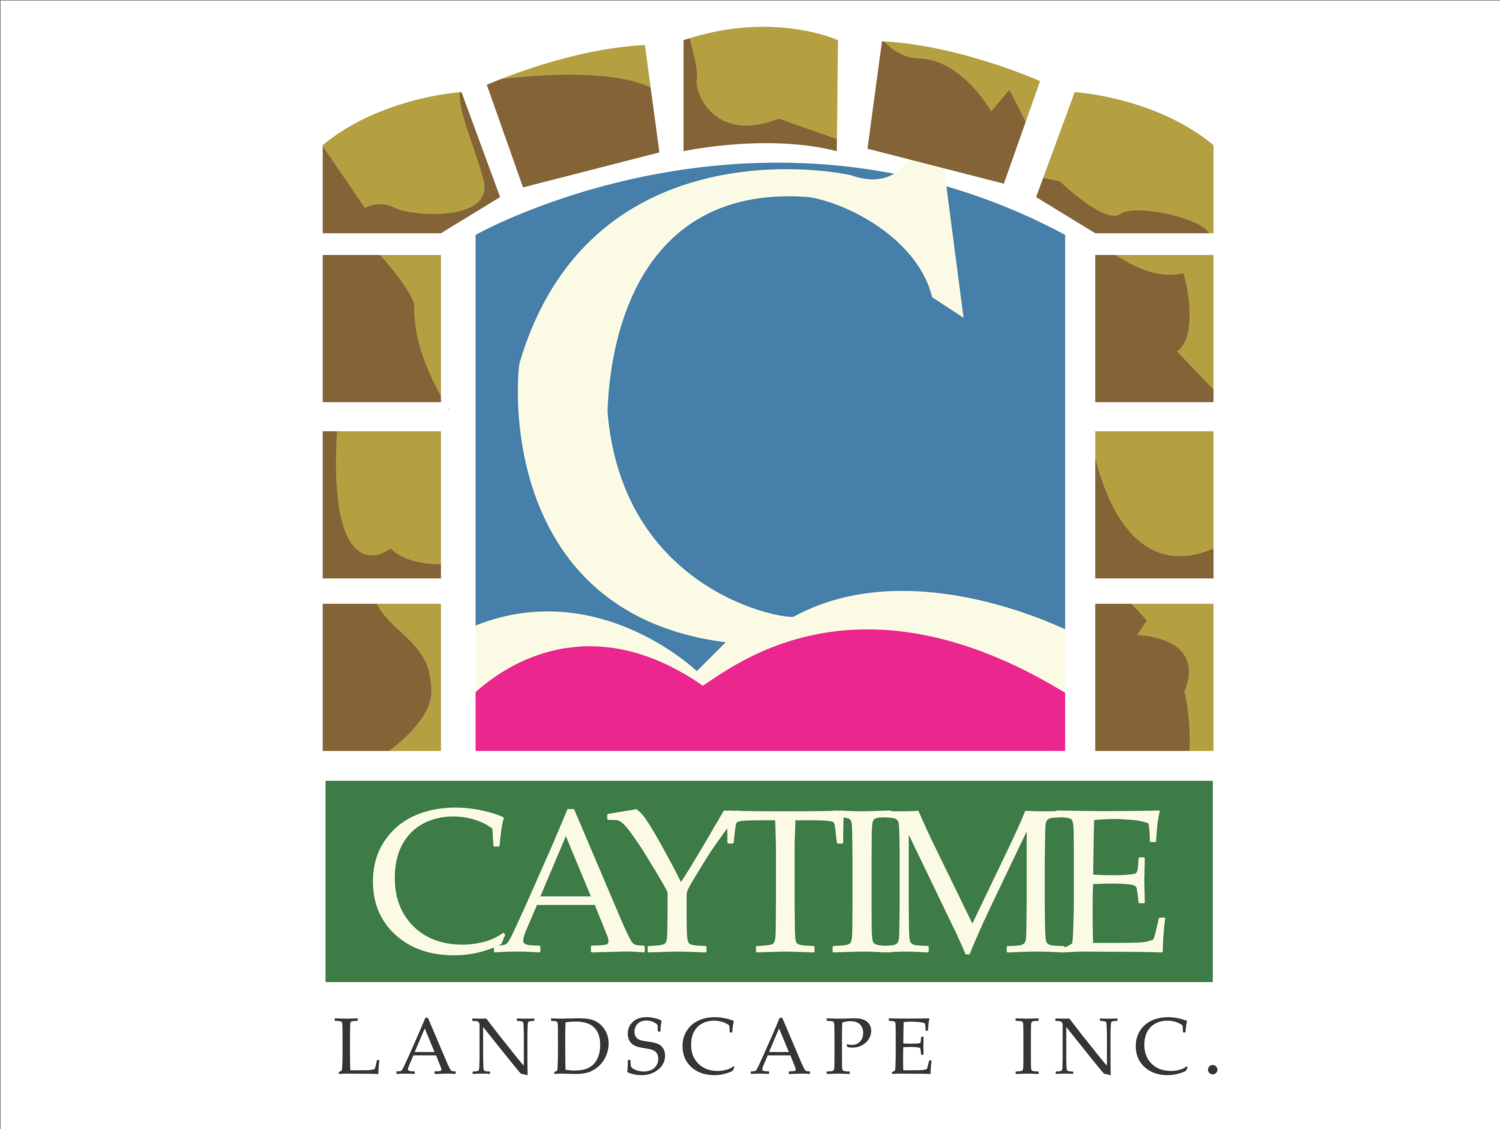 Caytime Landscaping Inc.